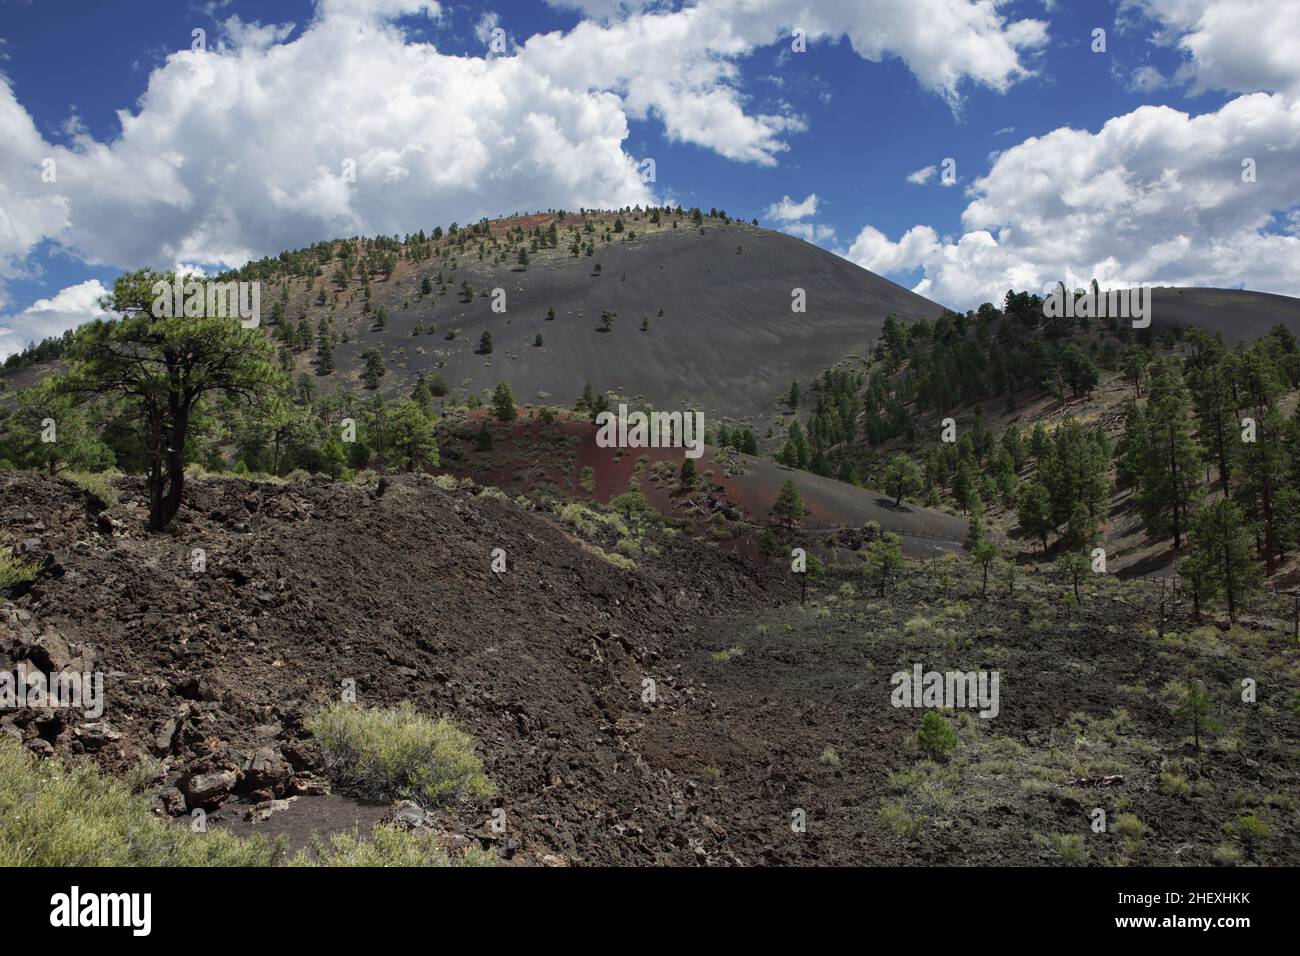 View of the top of Sunset Crater, a volcano cinder cone in the San Francisco Volcanic Field north of Flagstaff, AZ Stock Photo